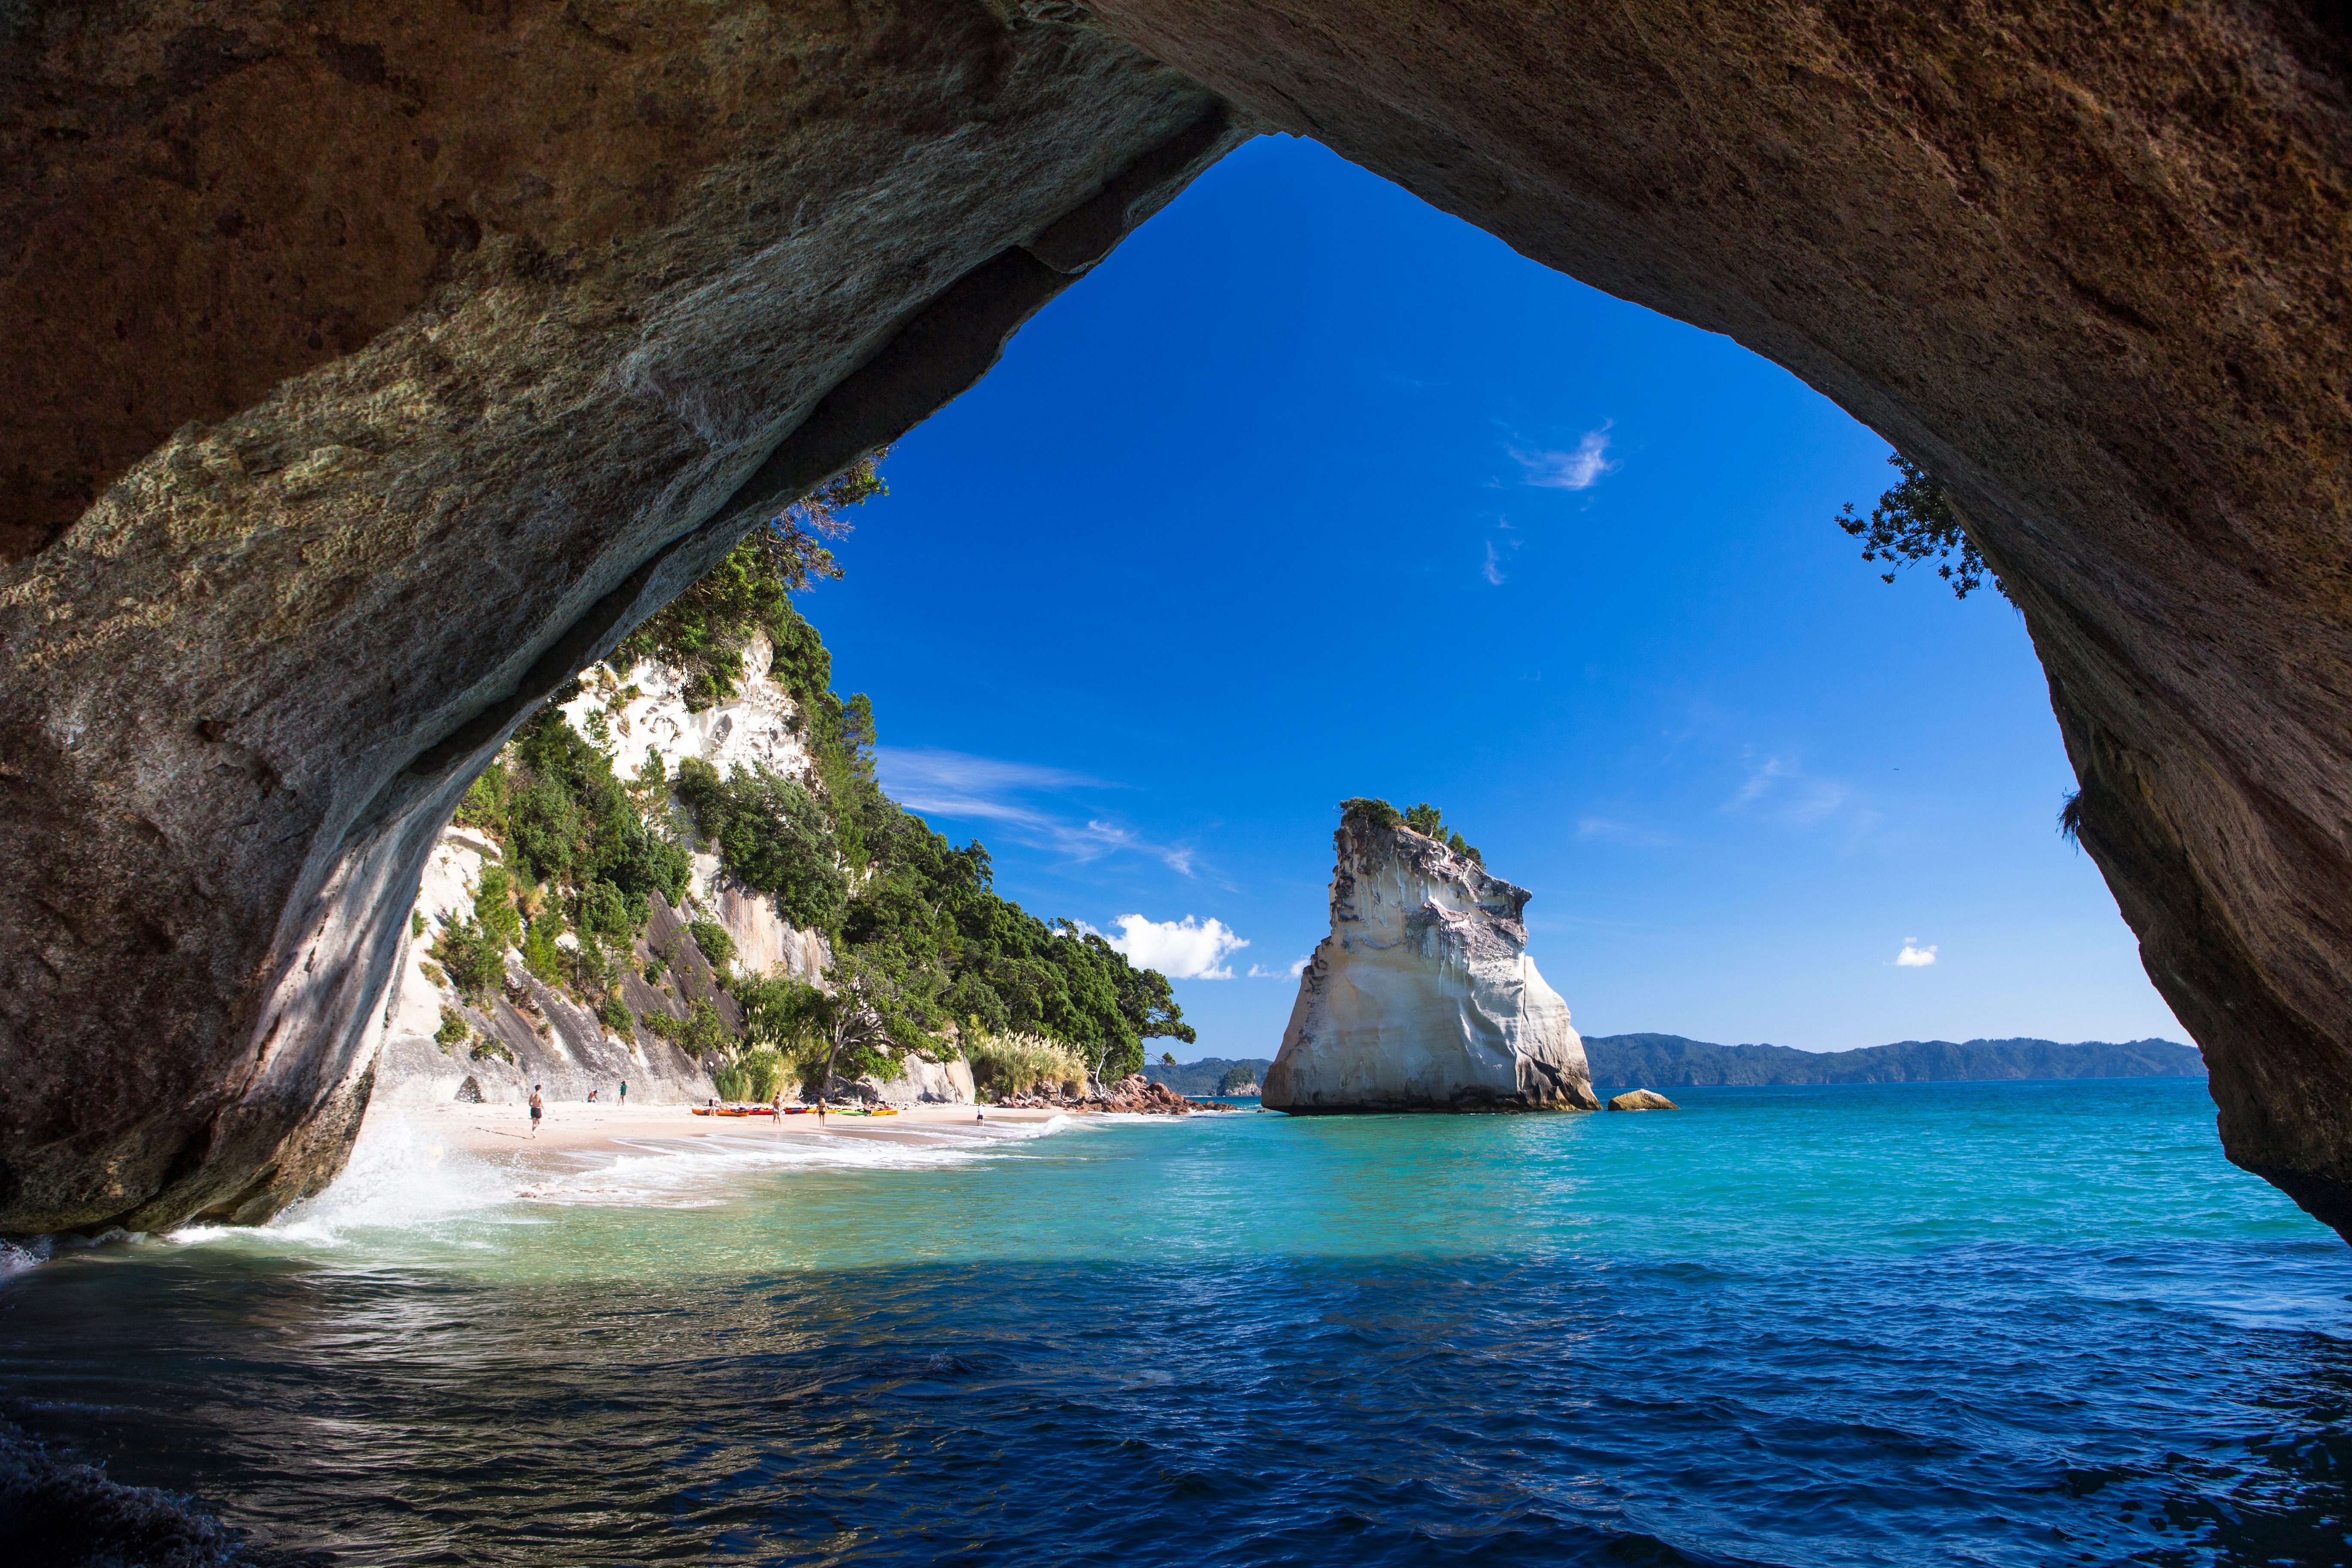 A Silhouette of New Zealand's famed Cathedral Cove and one of the most iconic landmarks in the country.